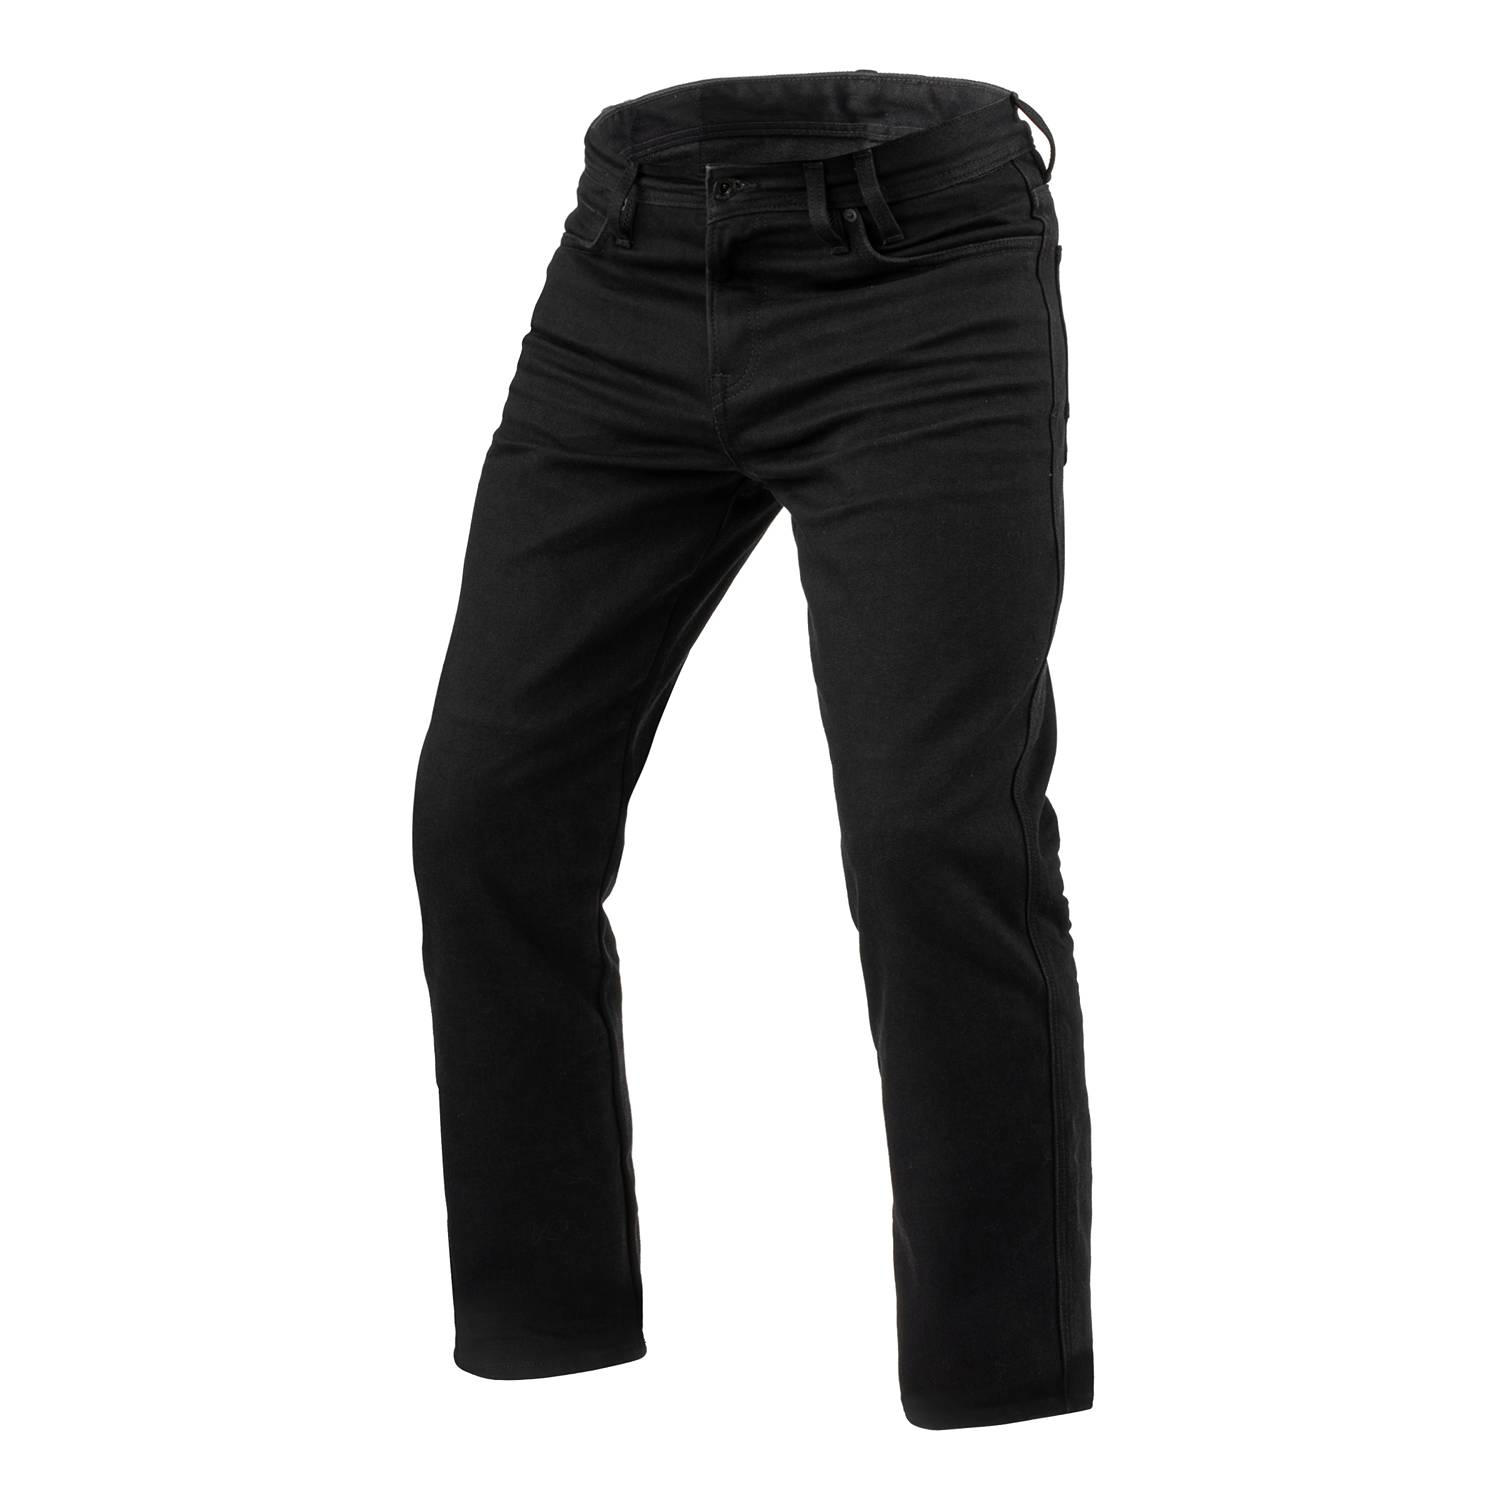 Image of EU REV'IT! Jeans Lombard 3 RF Black L34 Motorcycle Jeans Taille L34/W28